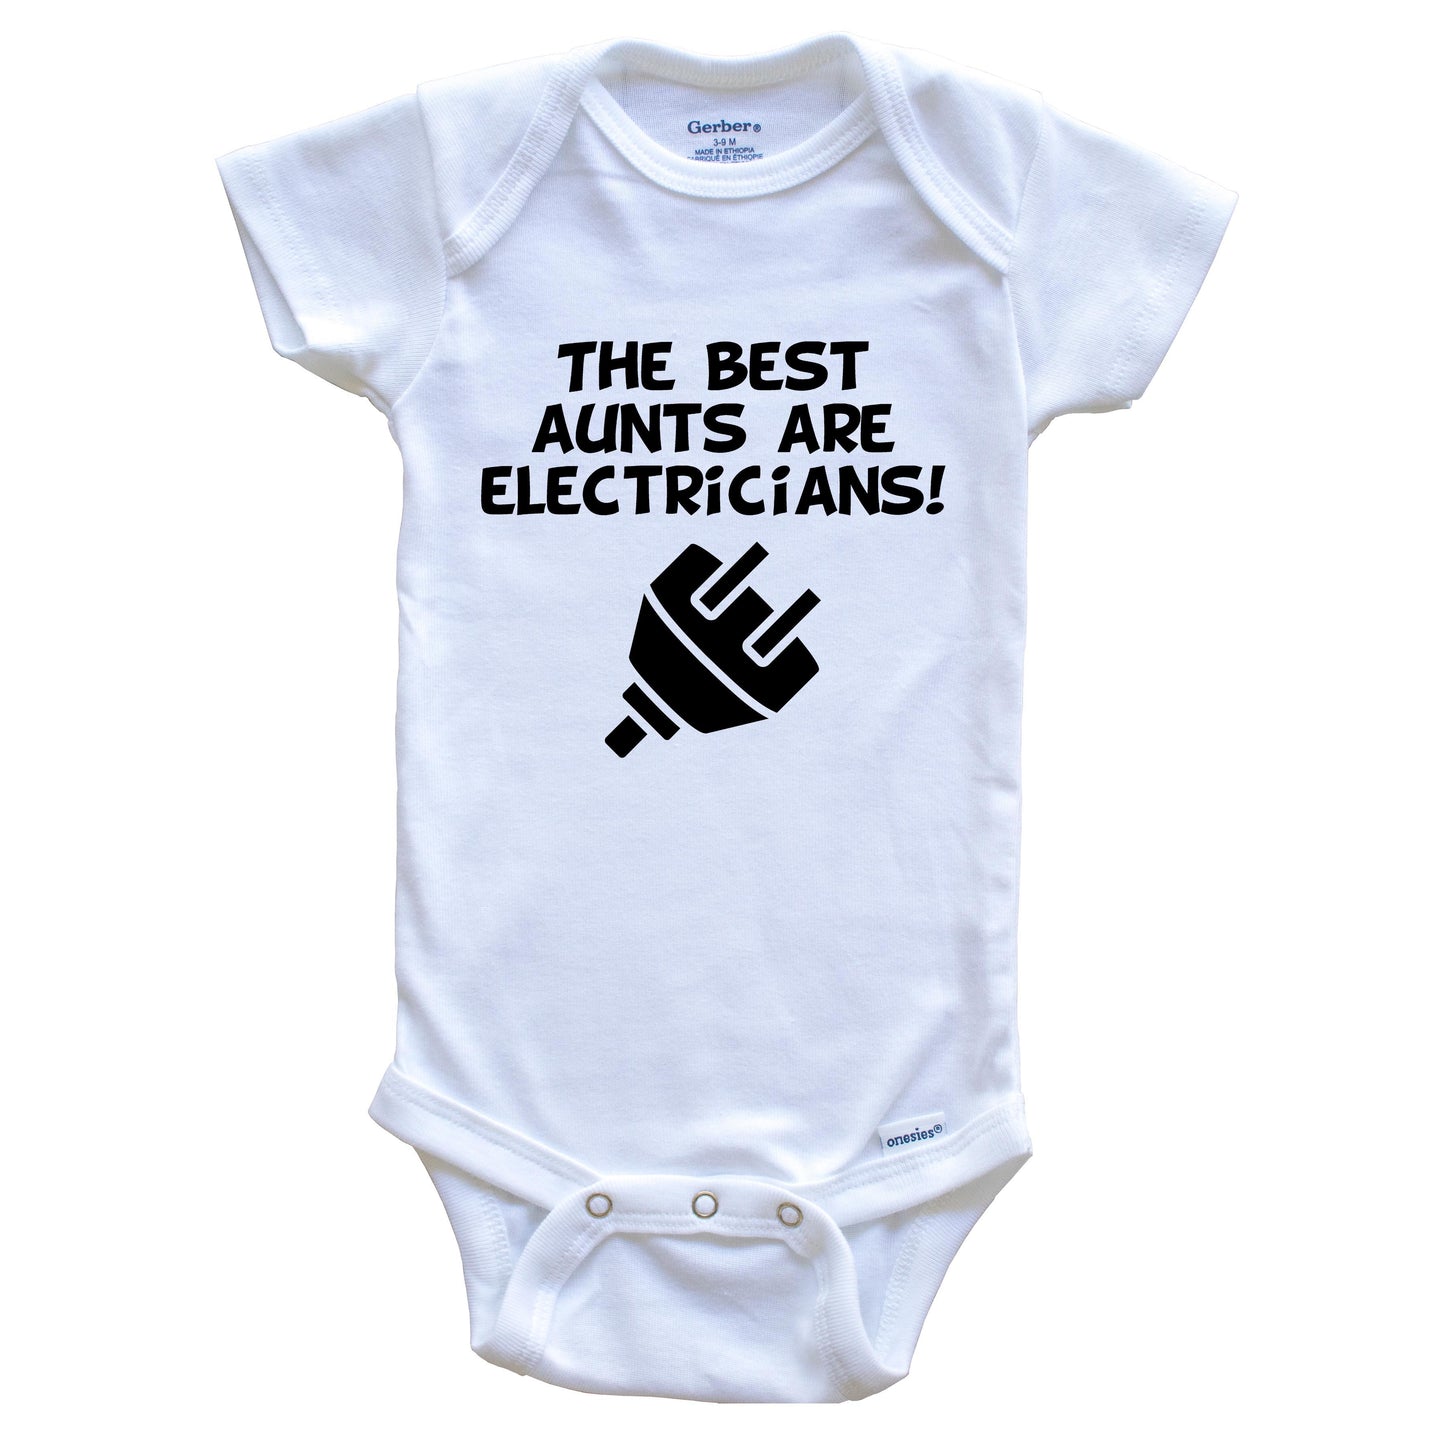 The Best Aunts Are Electricians Funny Niece Nephew Baby Onesie